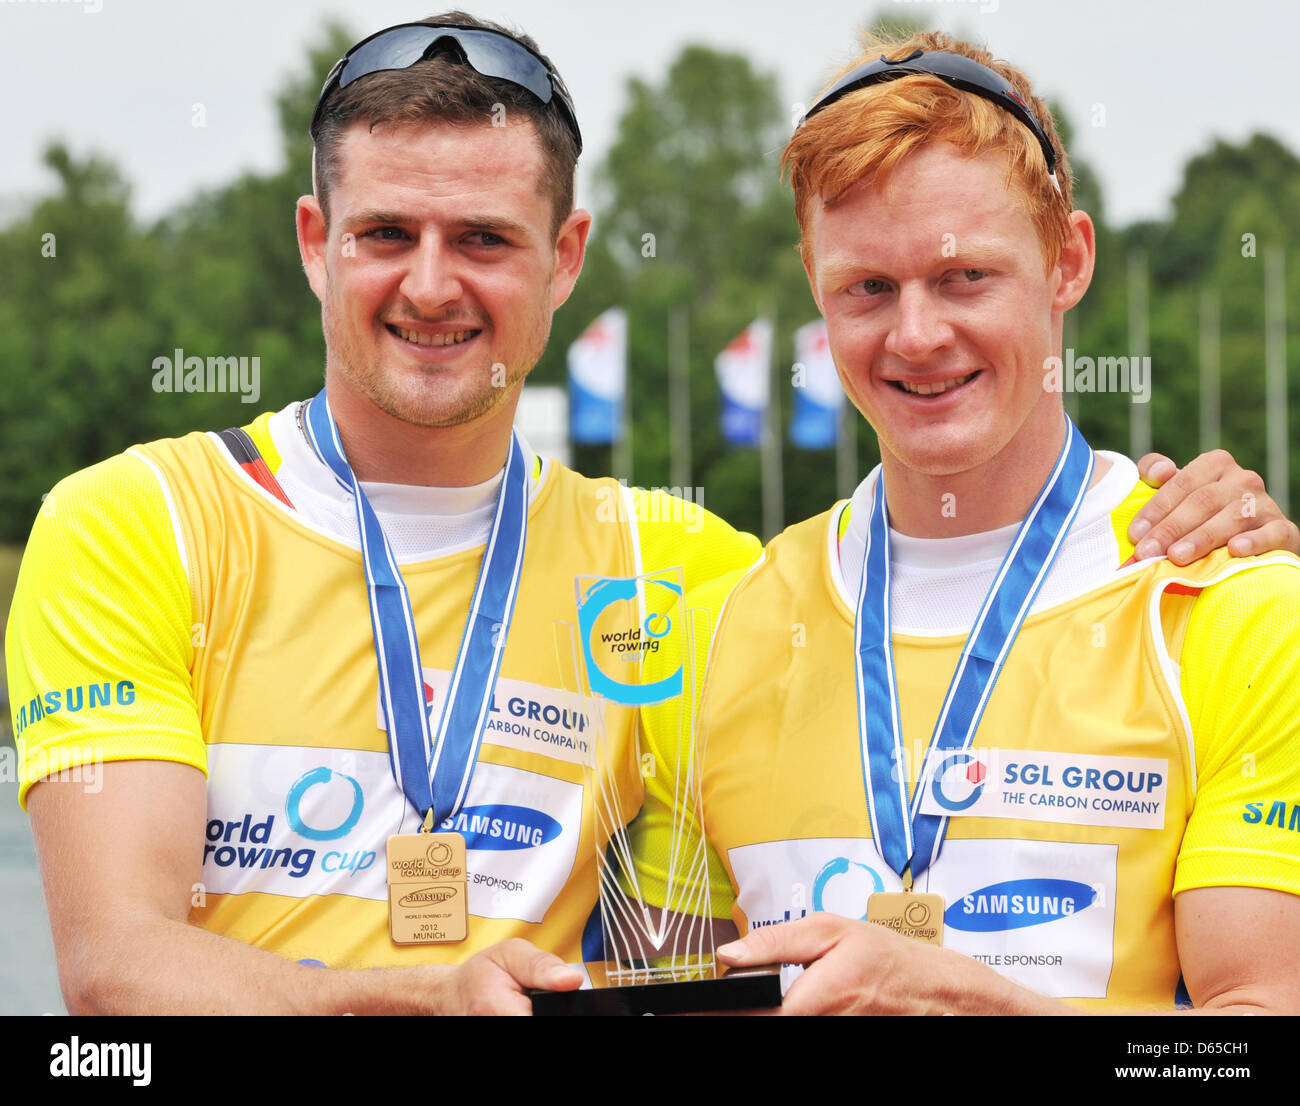 German rowers Eric Knittel (L) and Stephan Krueger pose after coming in third place in the M2x event at the rowing World Cup in Oberschleissheim near Munich, Germany, 17 June 2012. Photo: FRANK LEONHARDT Stock Photo